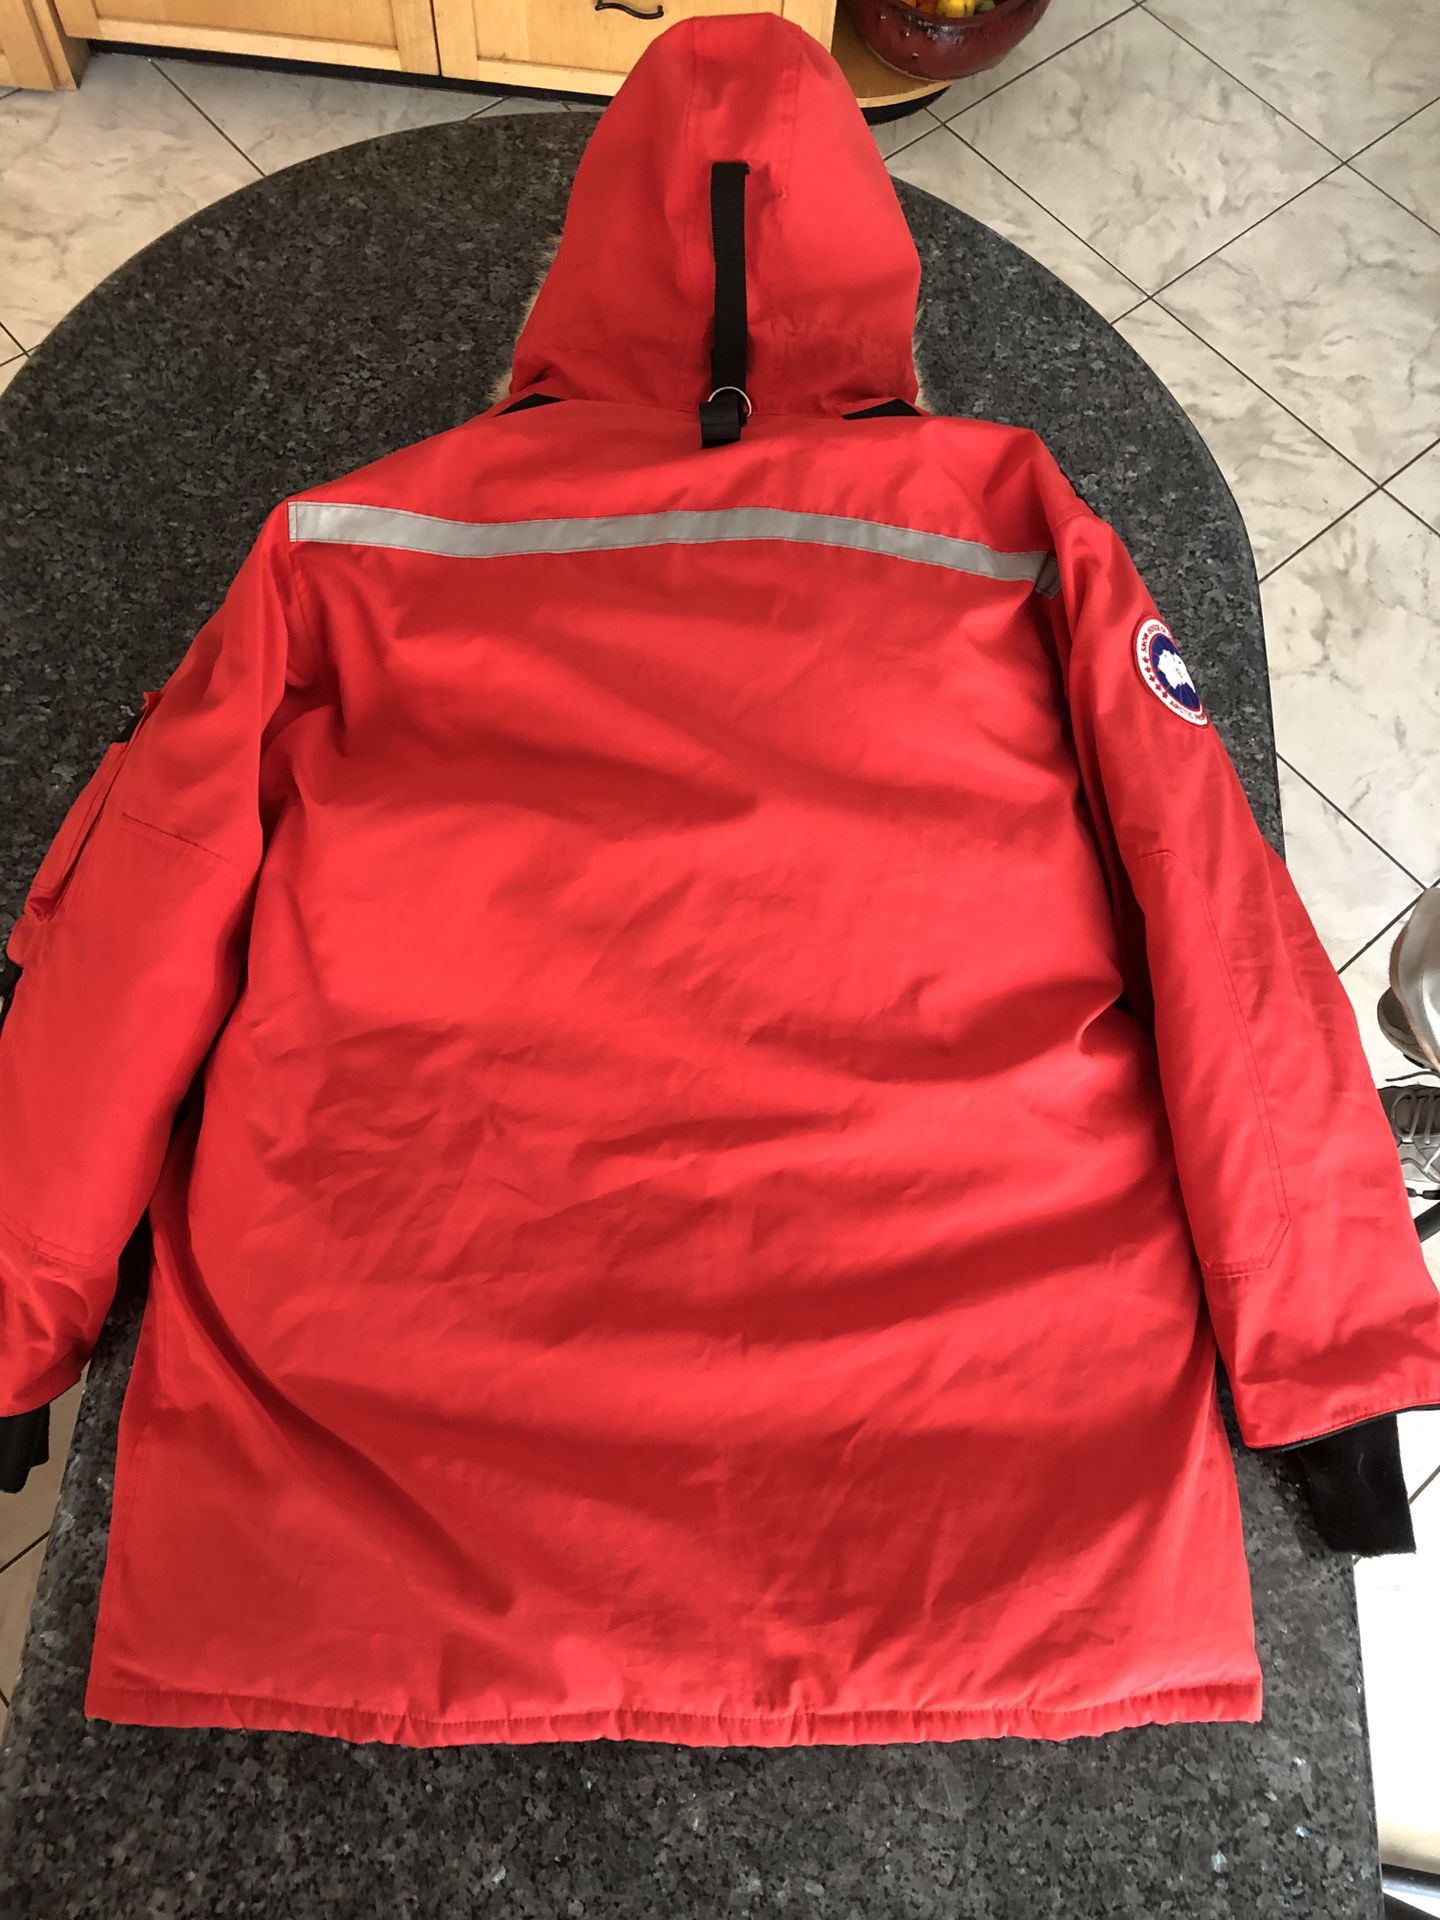 Canada Goose Authentic Kids Jacket for Sale in West Bloomfield Township, MI  - OfferUp